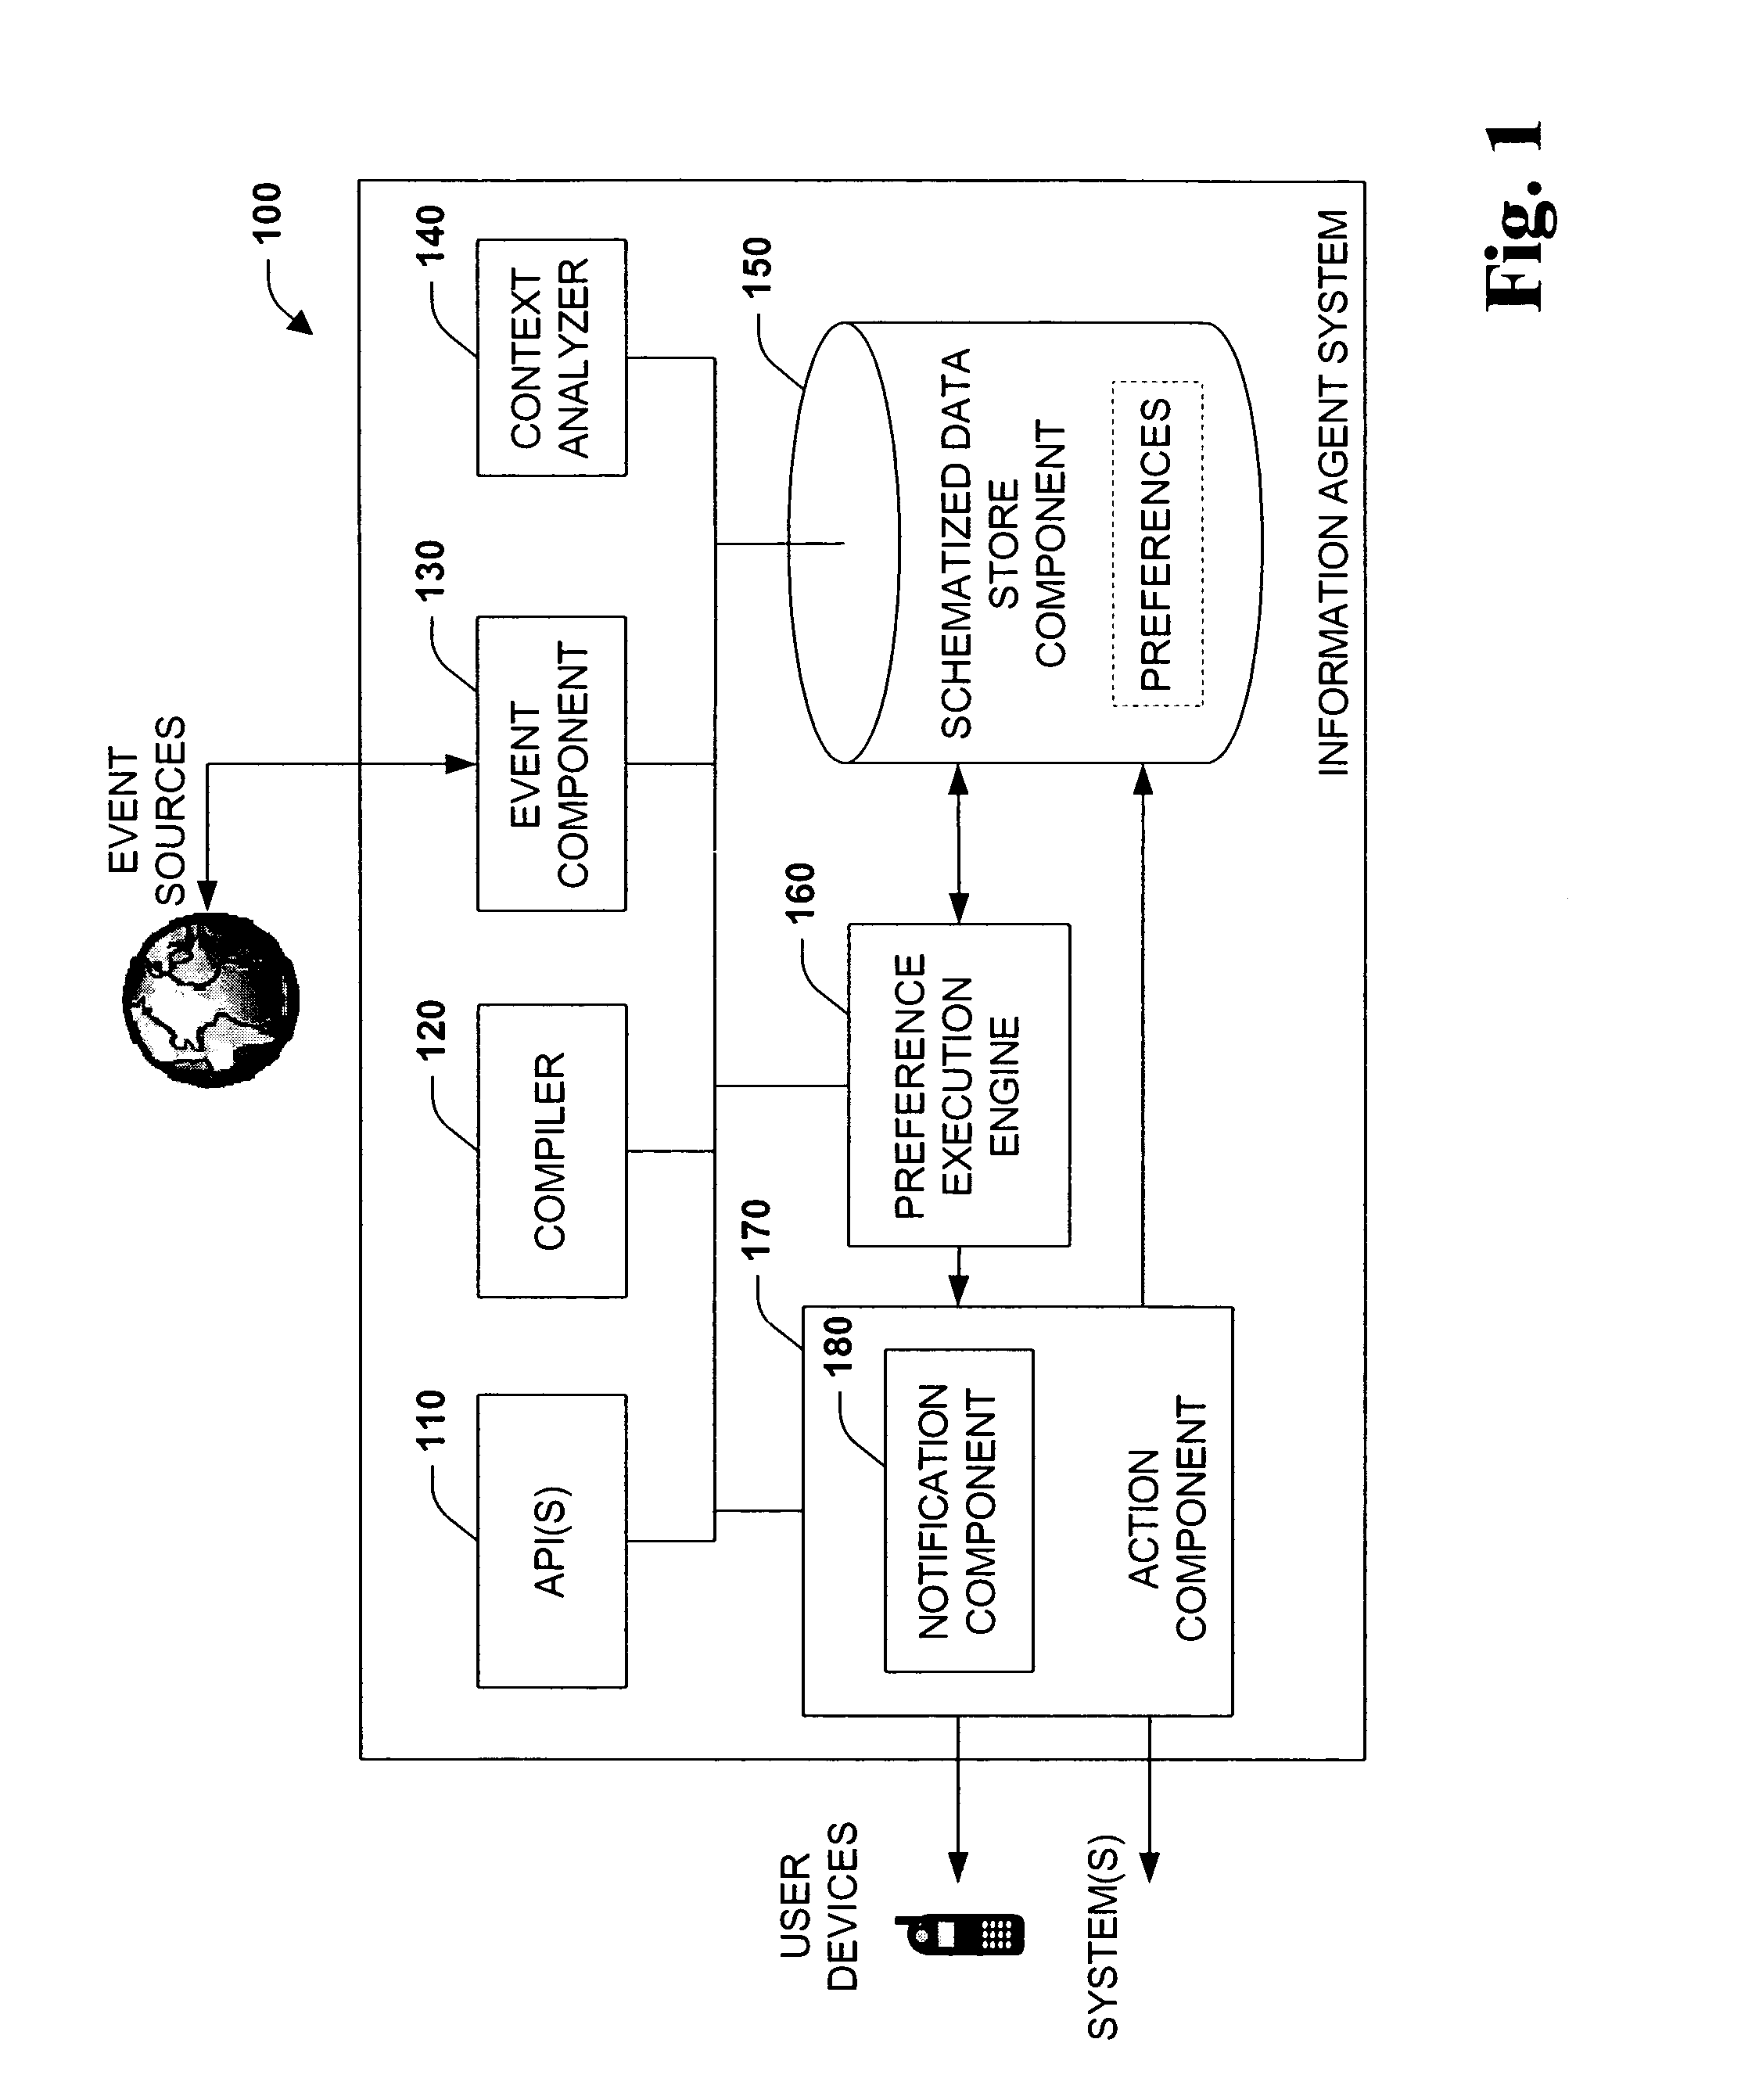 System and method for extending application preferences classes